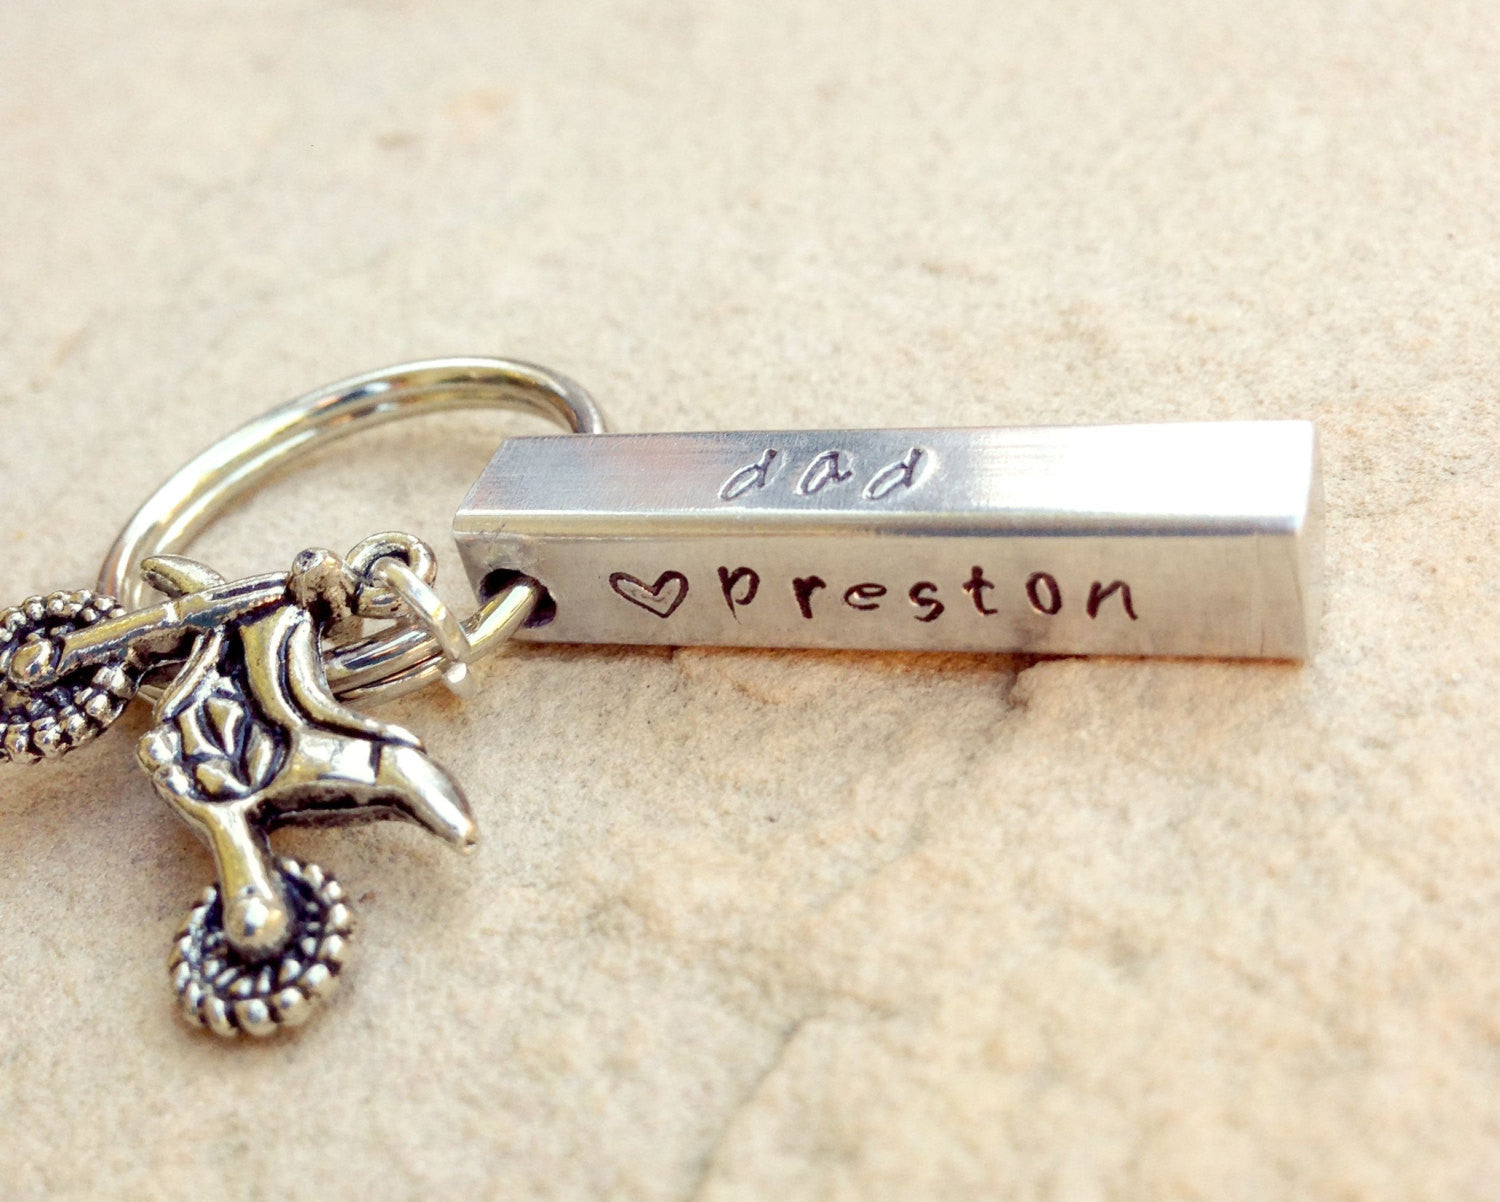 Motocross Keychain, Personalized Bar Keychain, Gifts for Men, Gifts for Dad, Motocross, Keychain, Hand Stamped Keychain - Natashaaloha, jewelry, bracelets, necklace, keychains, fishing lures, gifts for men, charms, personalized, 